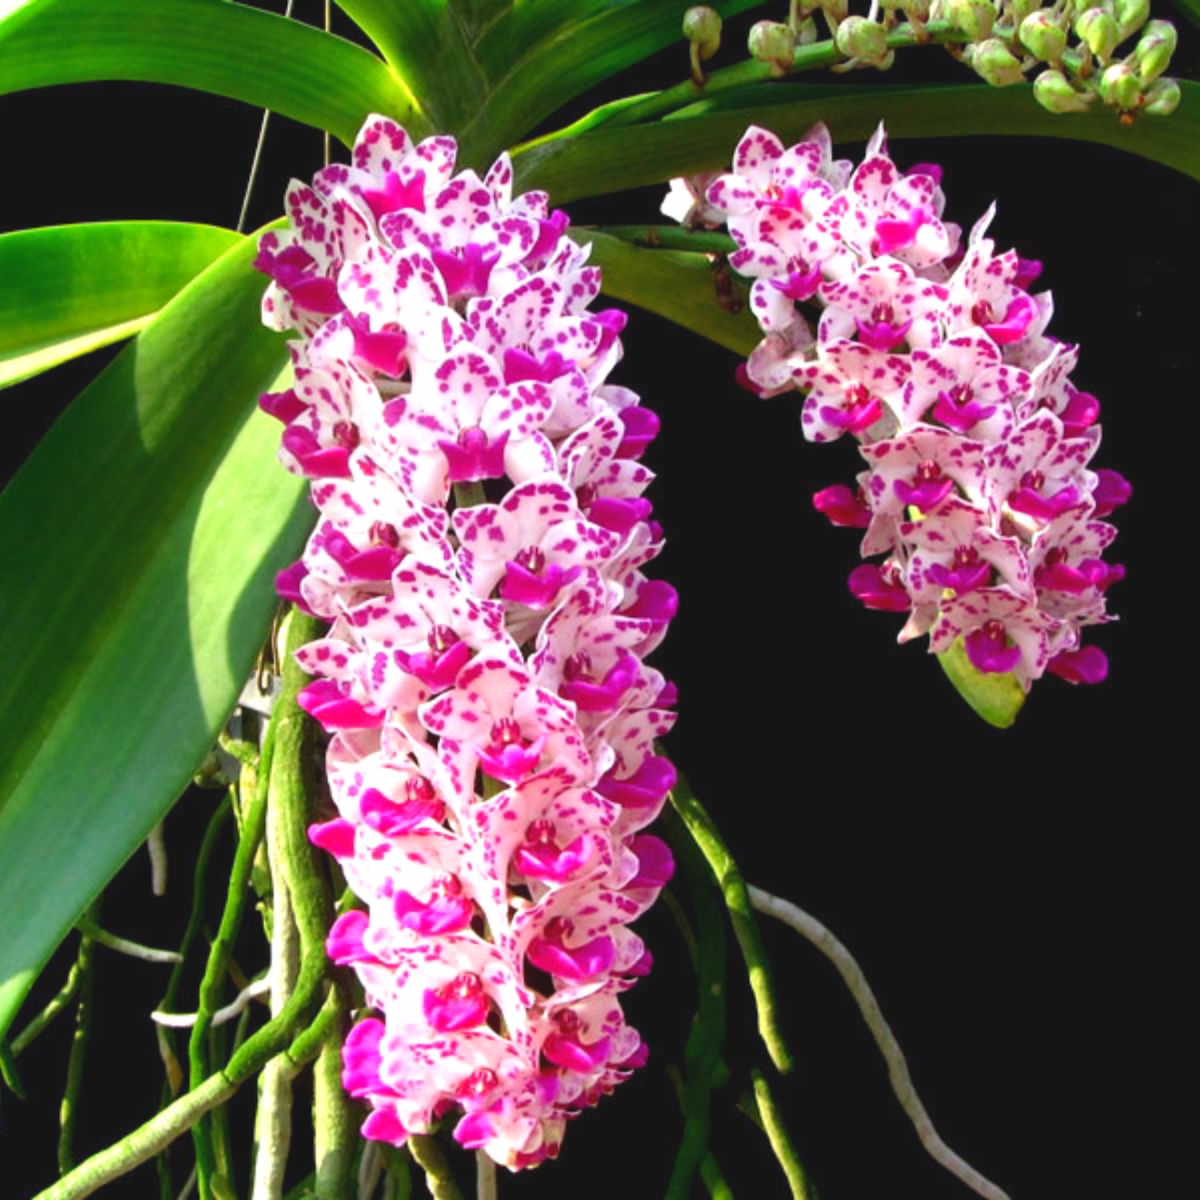 Close-up of a cluster of exquisite Rhynchostylis Gigantea orchid flowers in various shades of pink and white, capturing their delicate beauty and enchanting fragrance